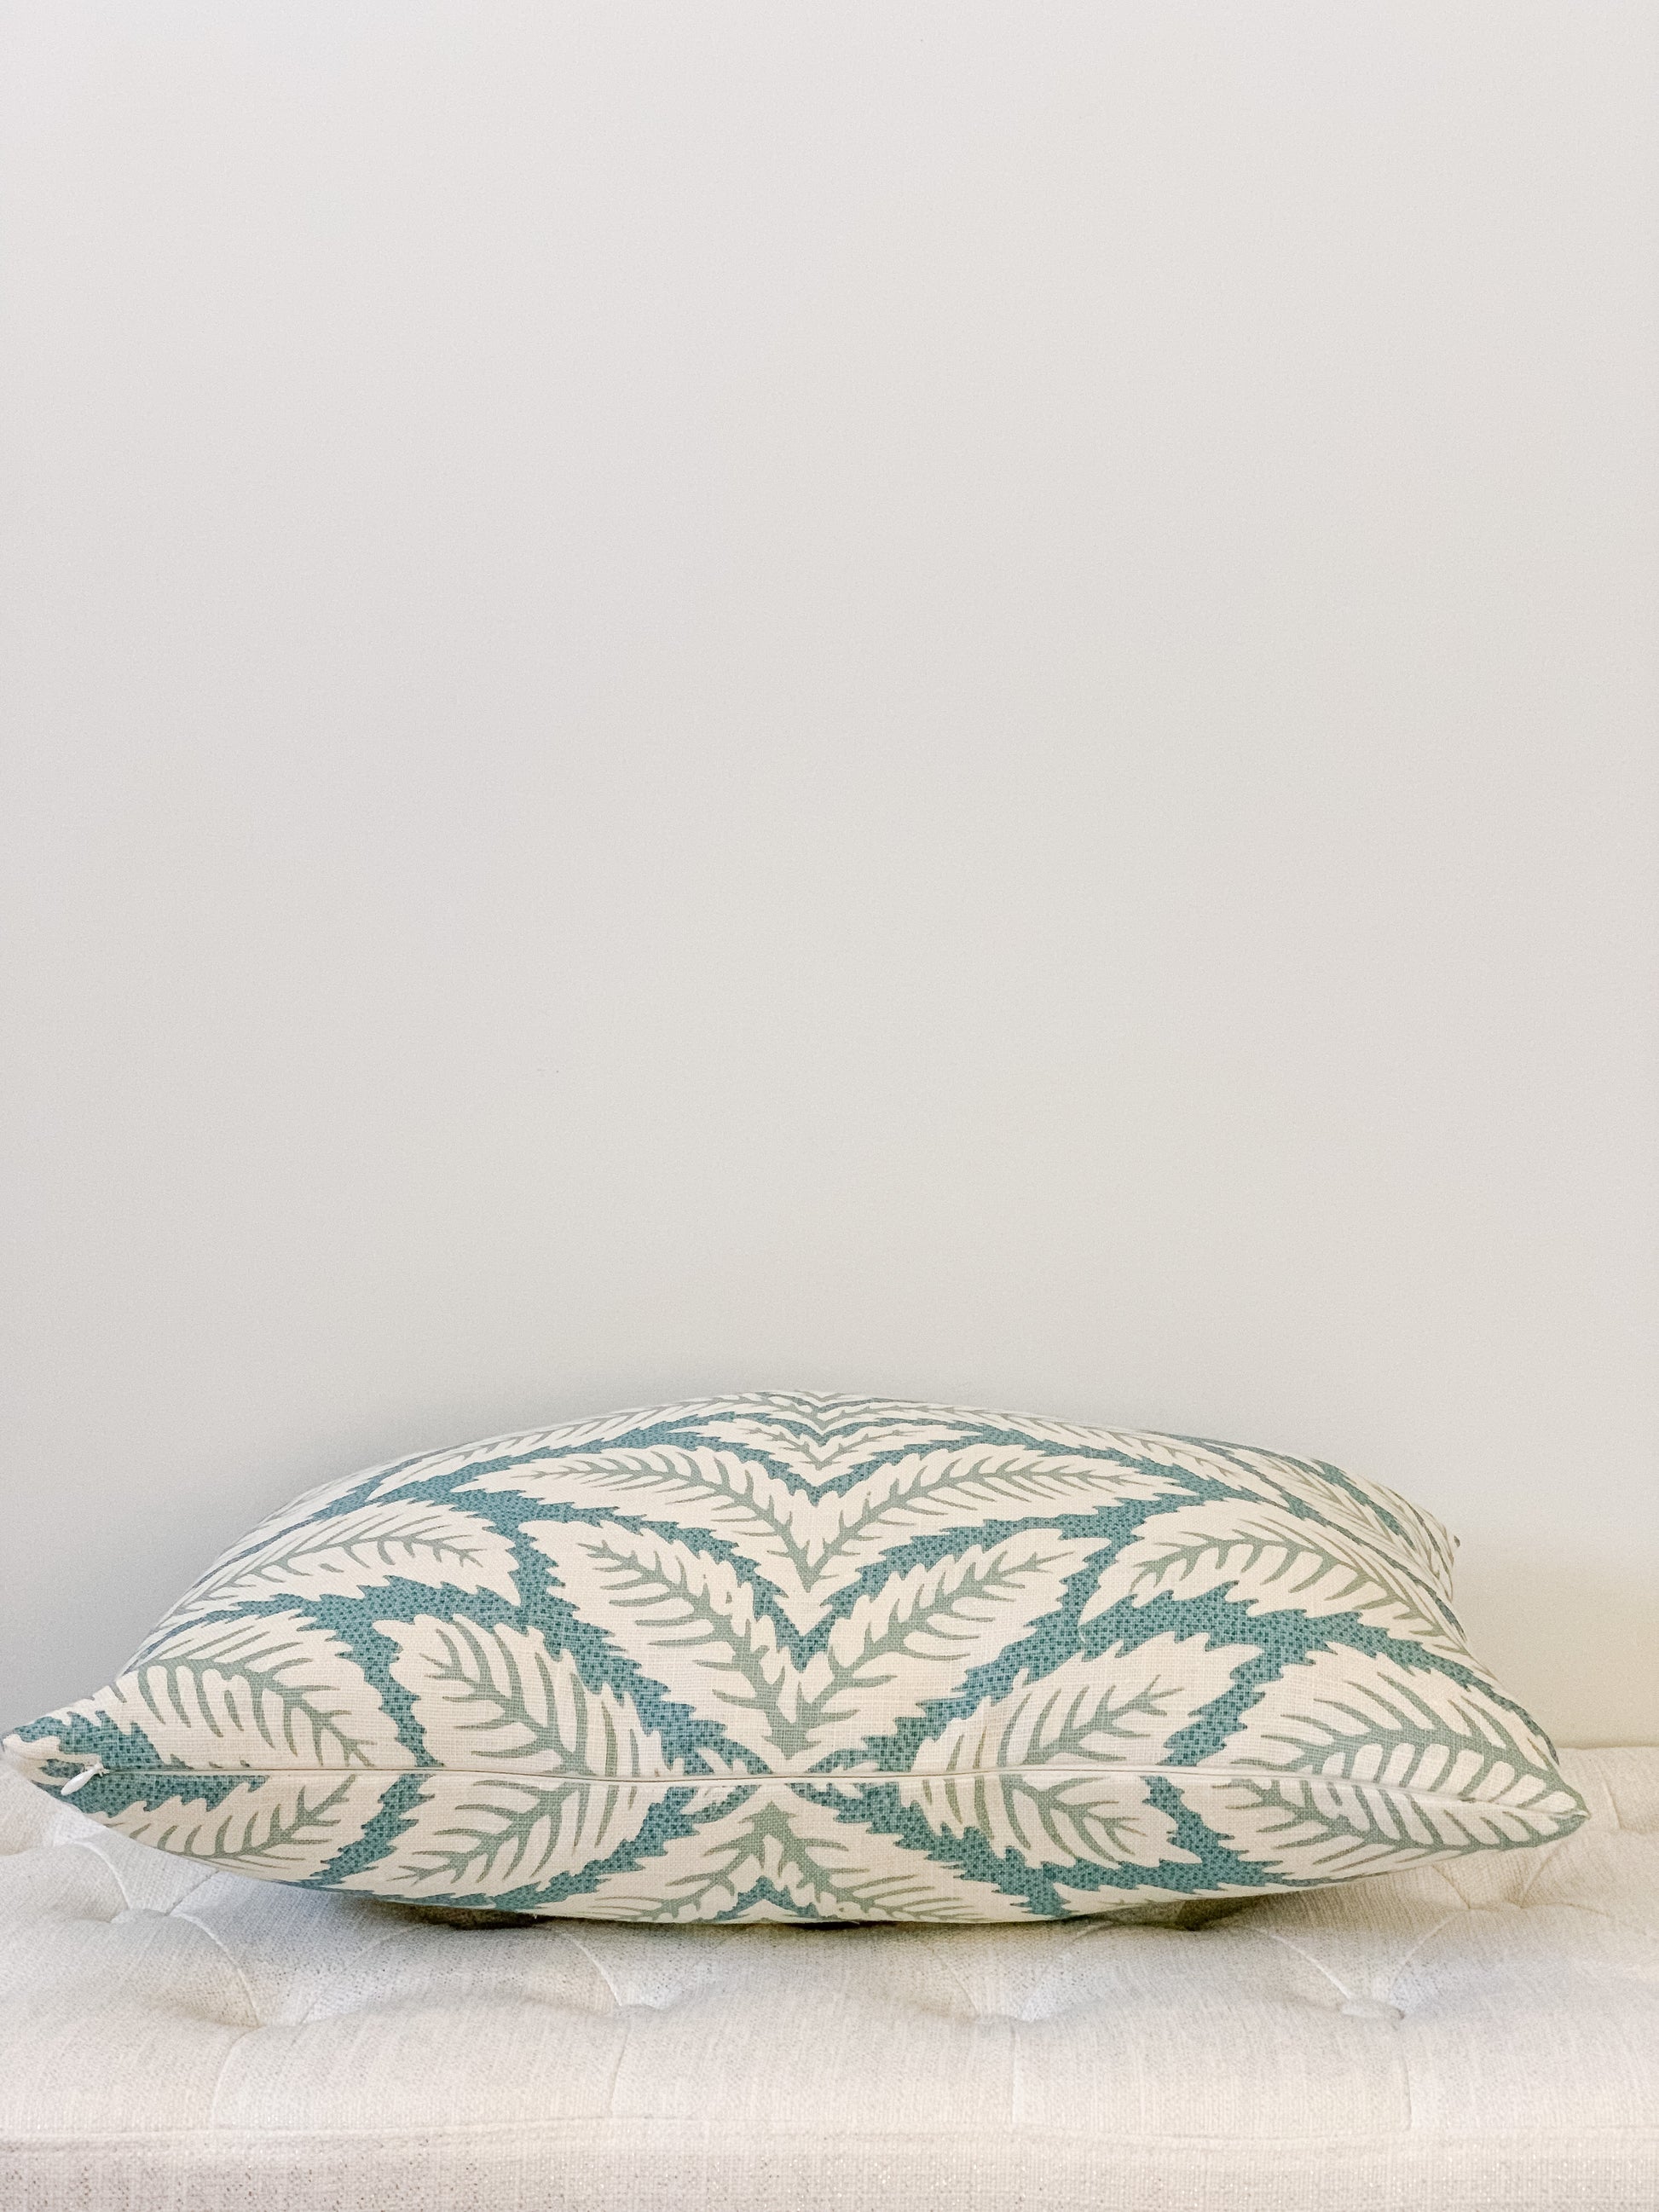 Side view of designer lumbar pillow with palm motif in aqua and cream tones. Large scale geometric.